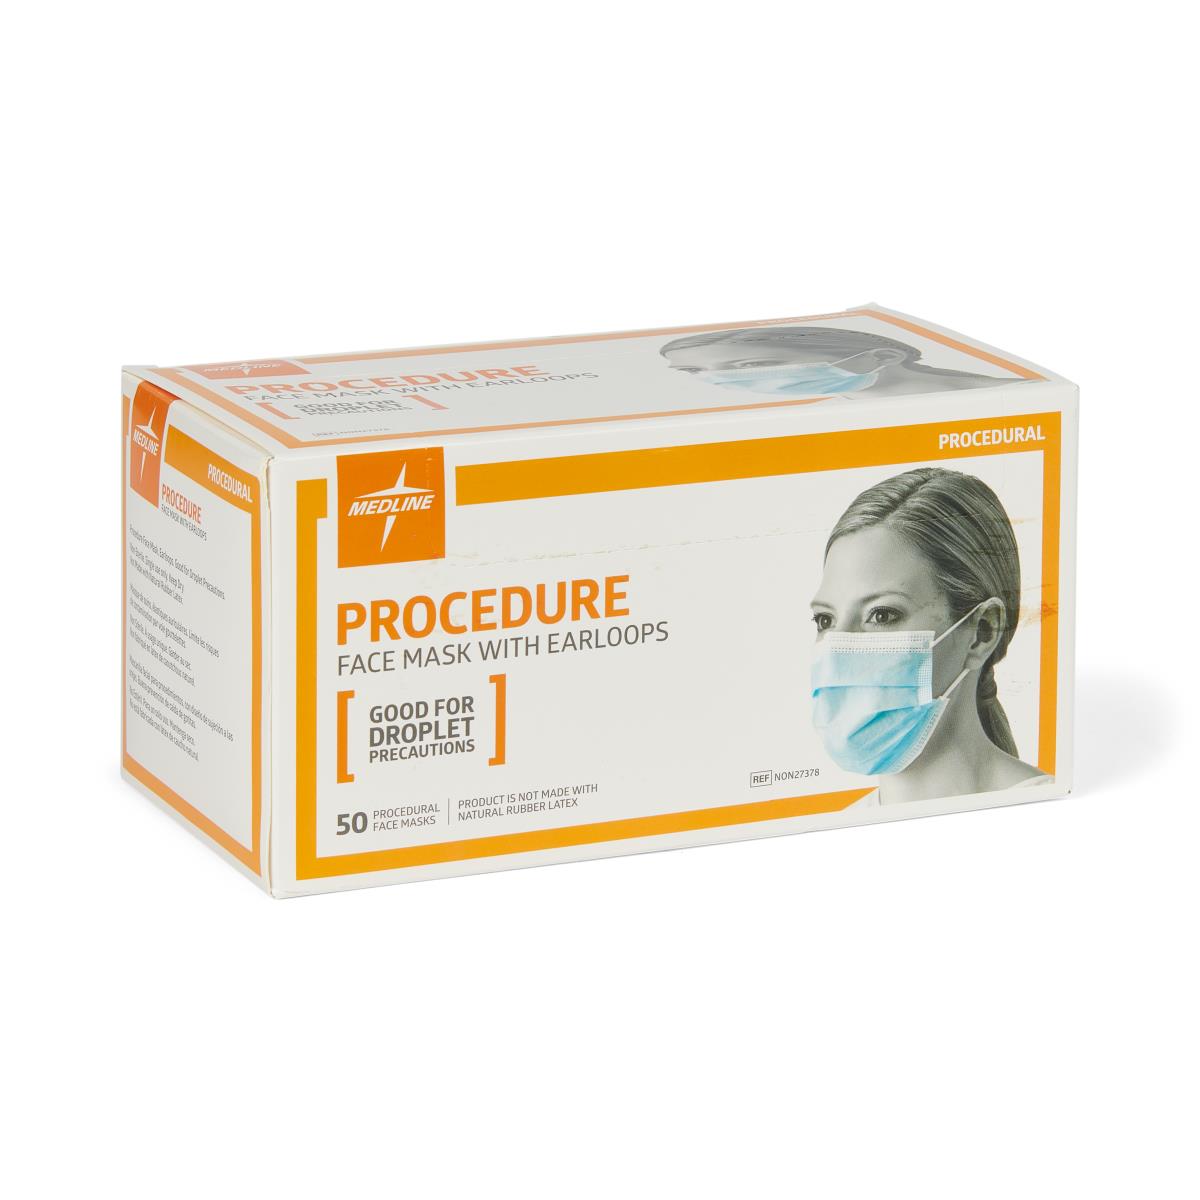 Medline Basic Procedure Mask with Earloops 50/bx NON27378Z